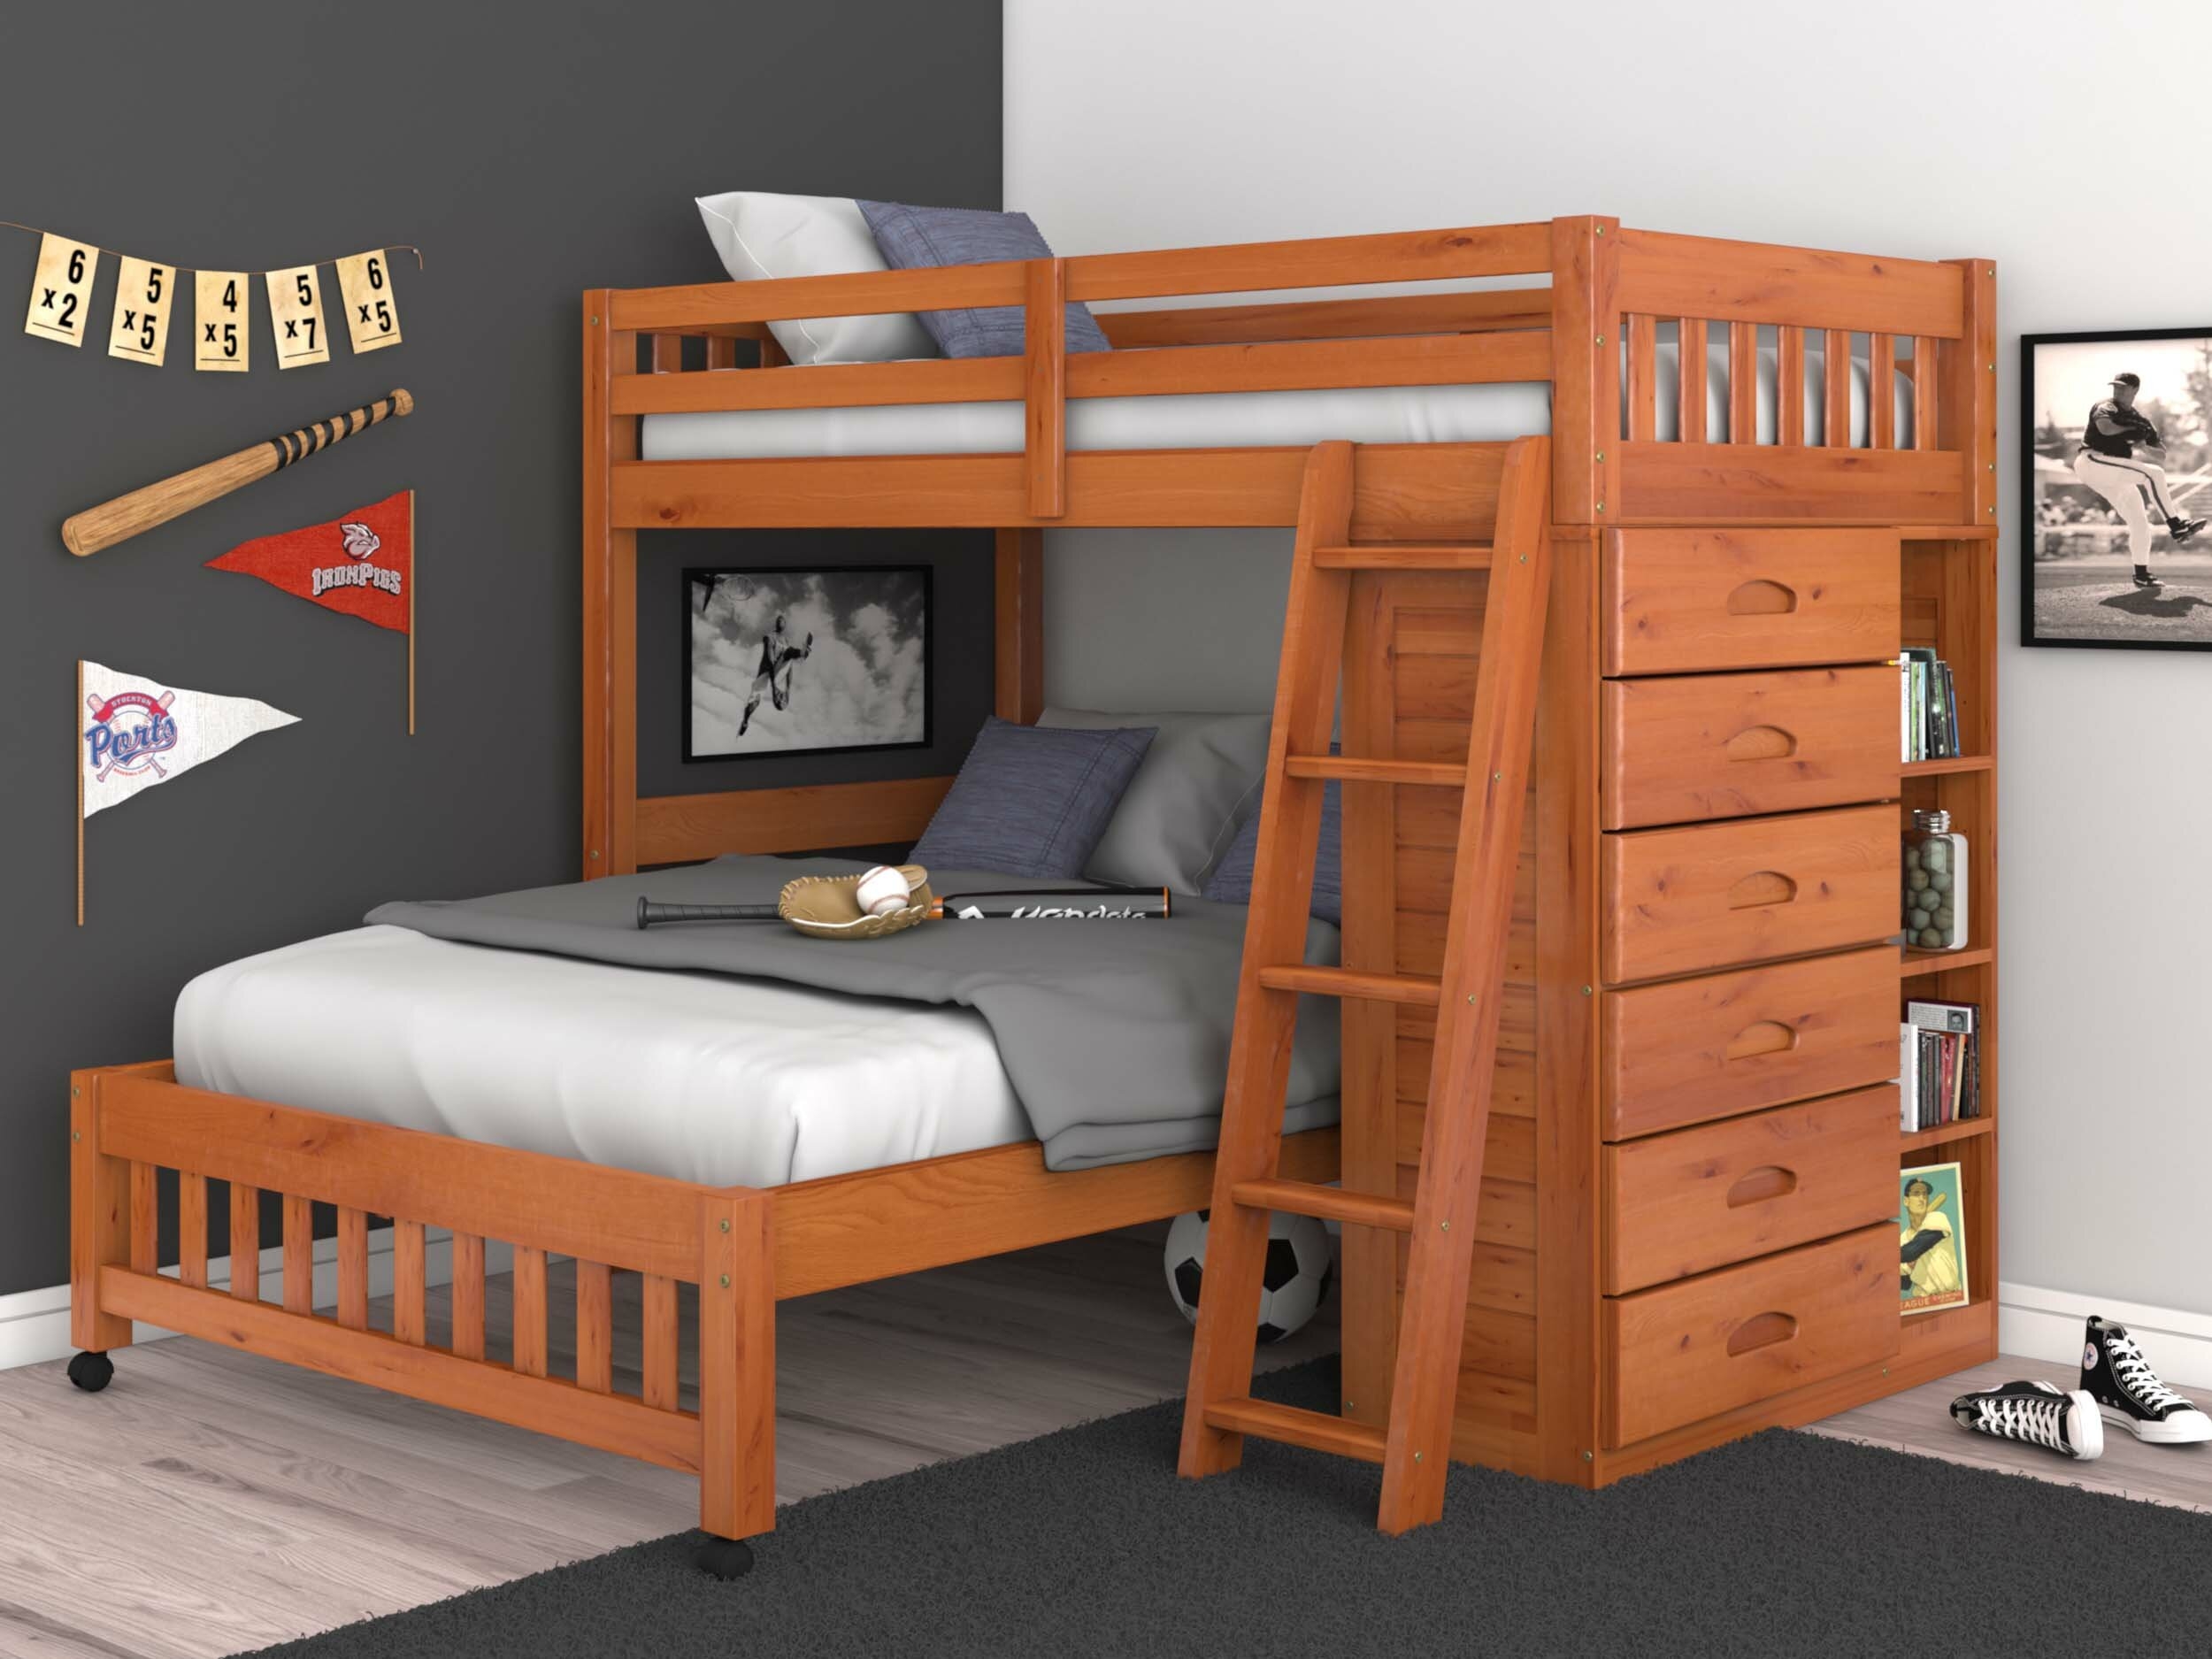 Bunk Beds With Dressers Visualhunt, Bunk Bed And Dresser Set